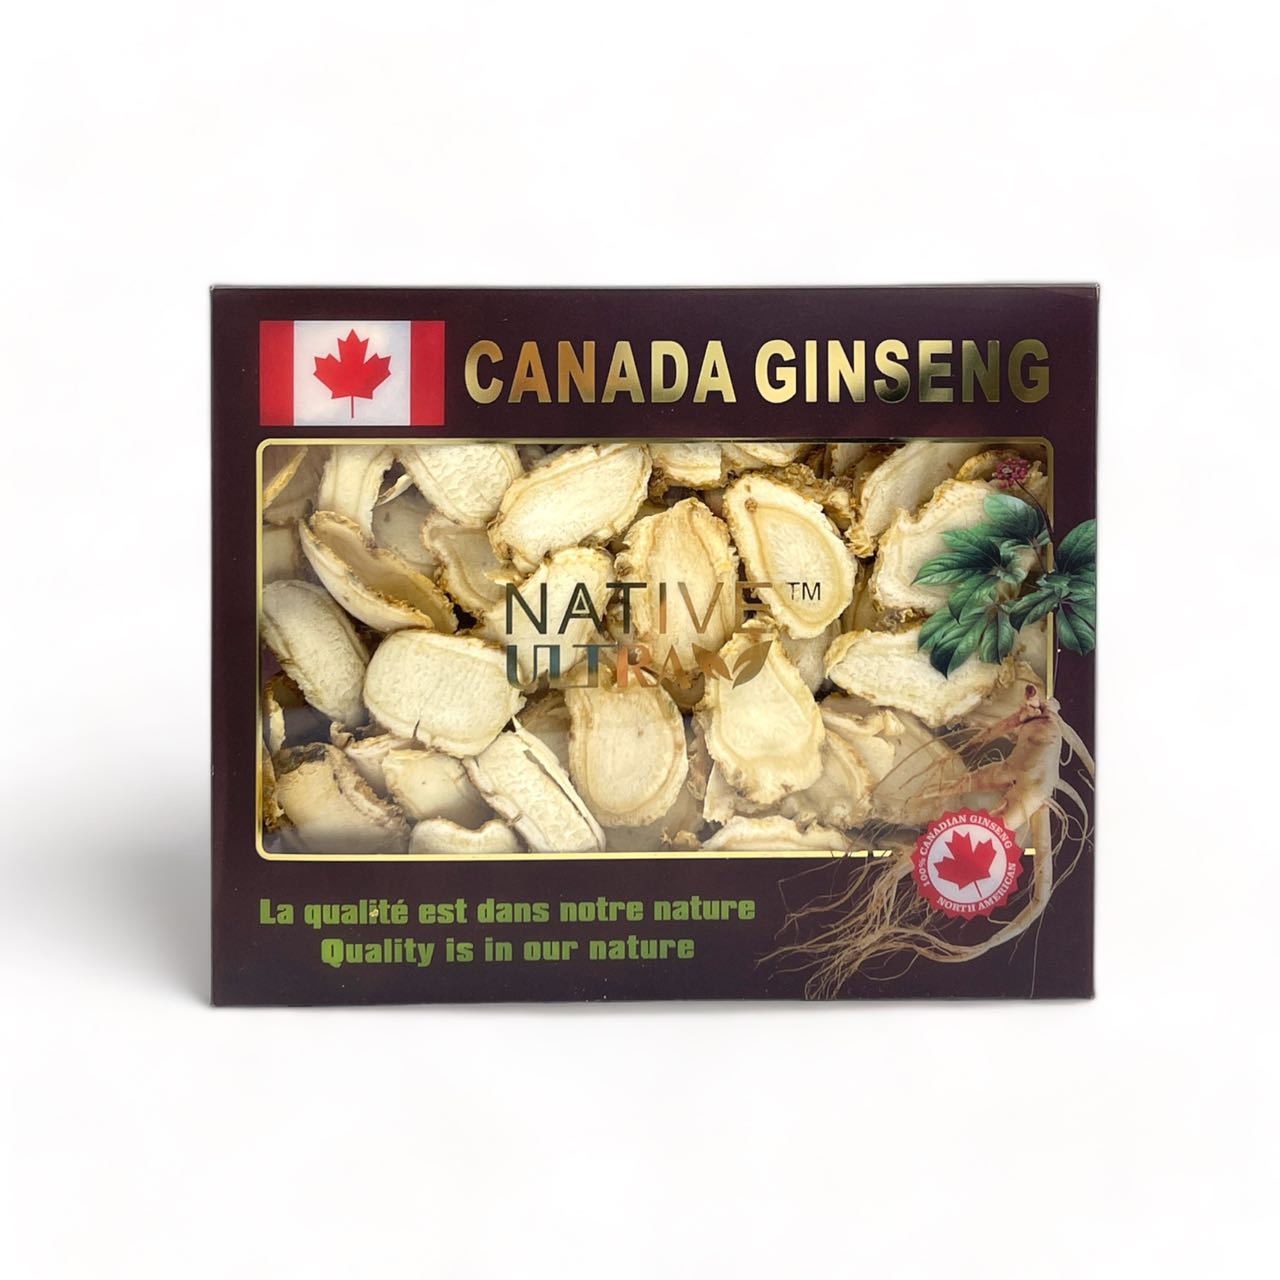 "NATIVE ULTRA" Canadian Ginseng Slices, 80g/box